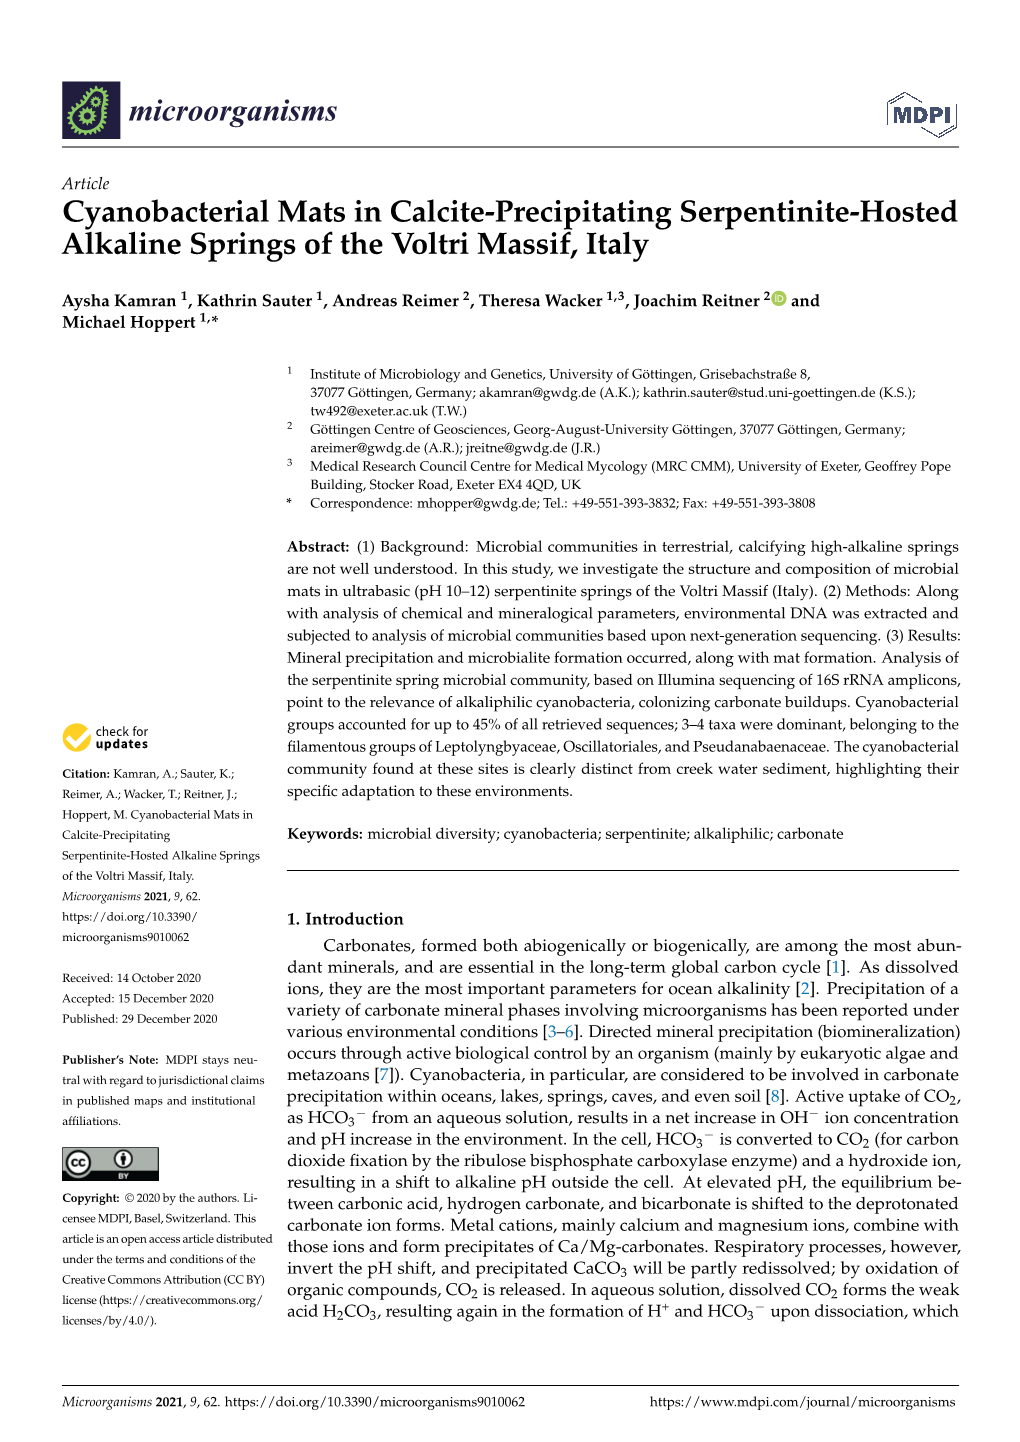 Cyanobacterial Mats in Calcite-Precipitating Serpentinite-Hosted Alkaline Springs of the Voltri Massif, Italy